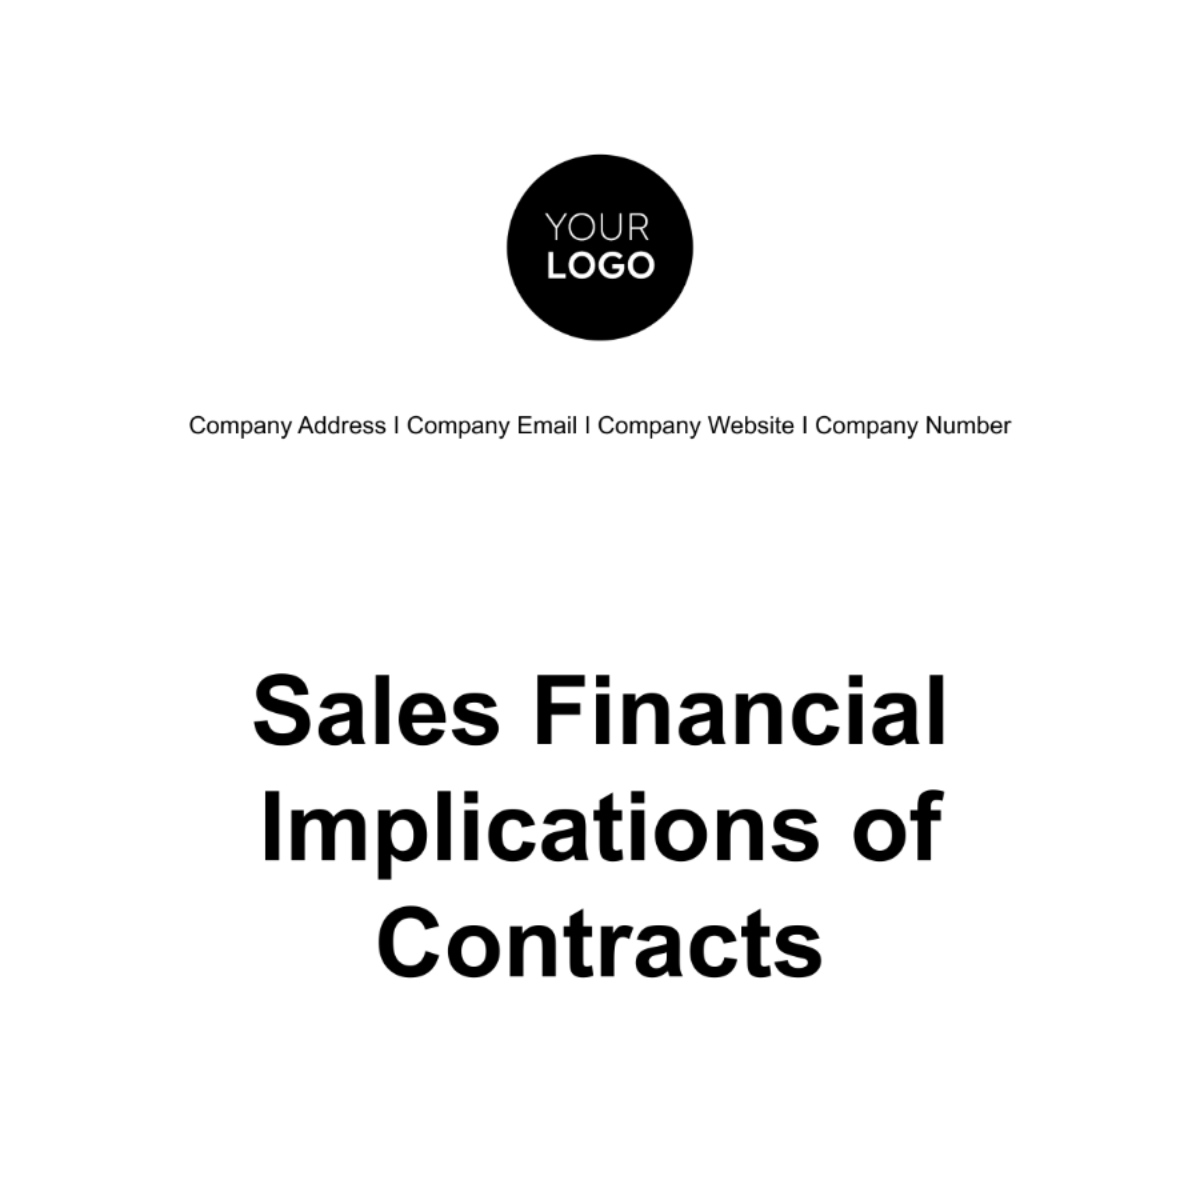 Sales Financial Implications of Contracts Template